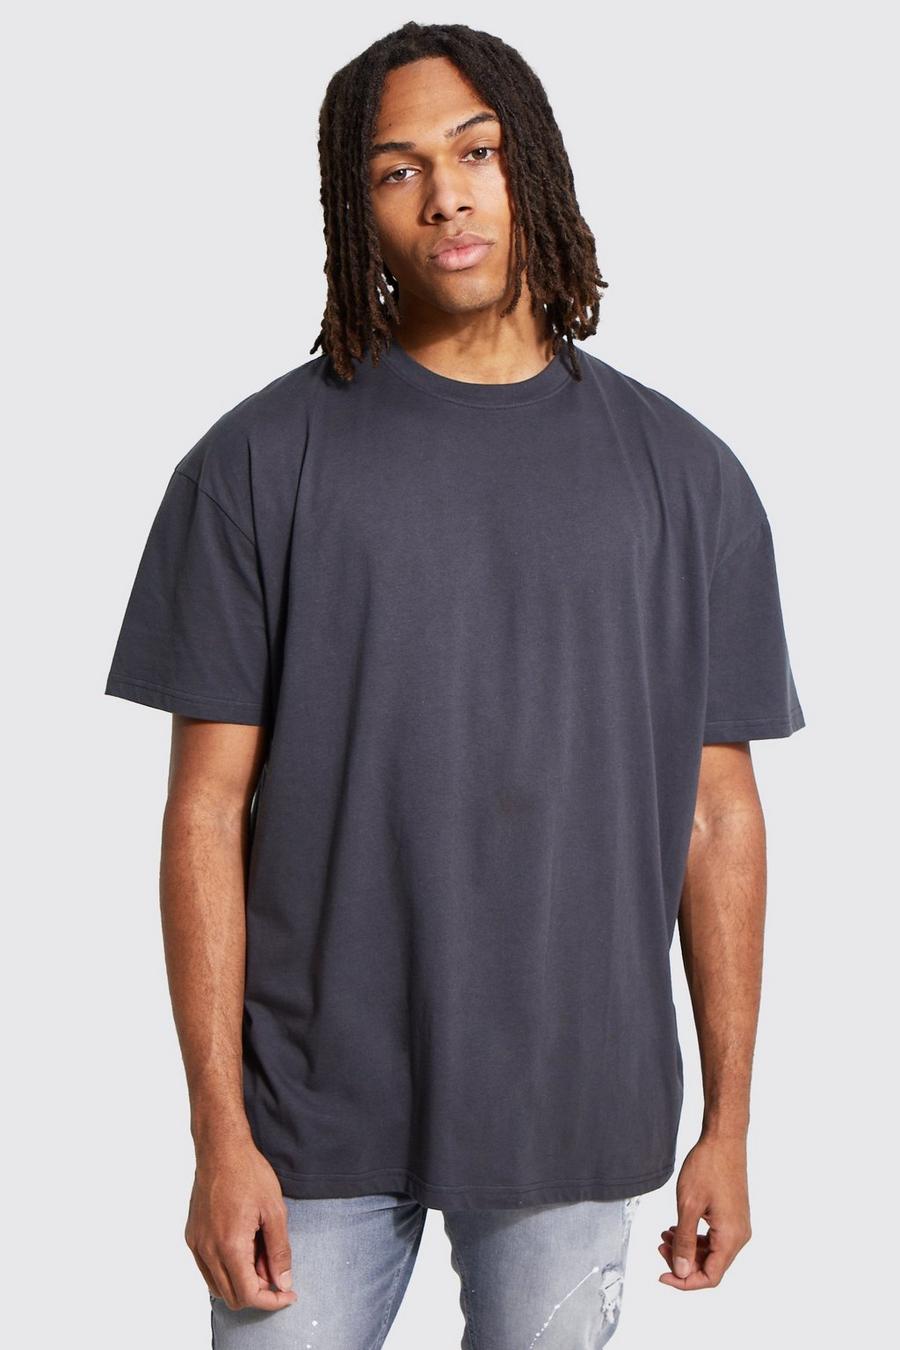 Charcoal grey Oversized Crew Neck T-Shirt image number 1